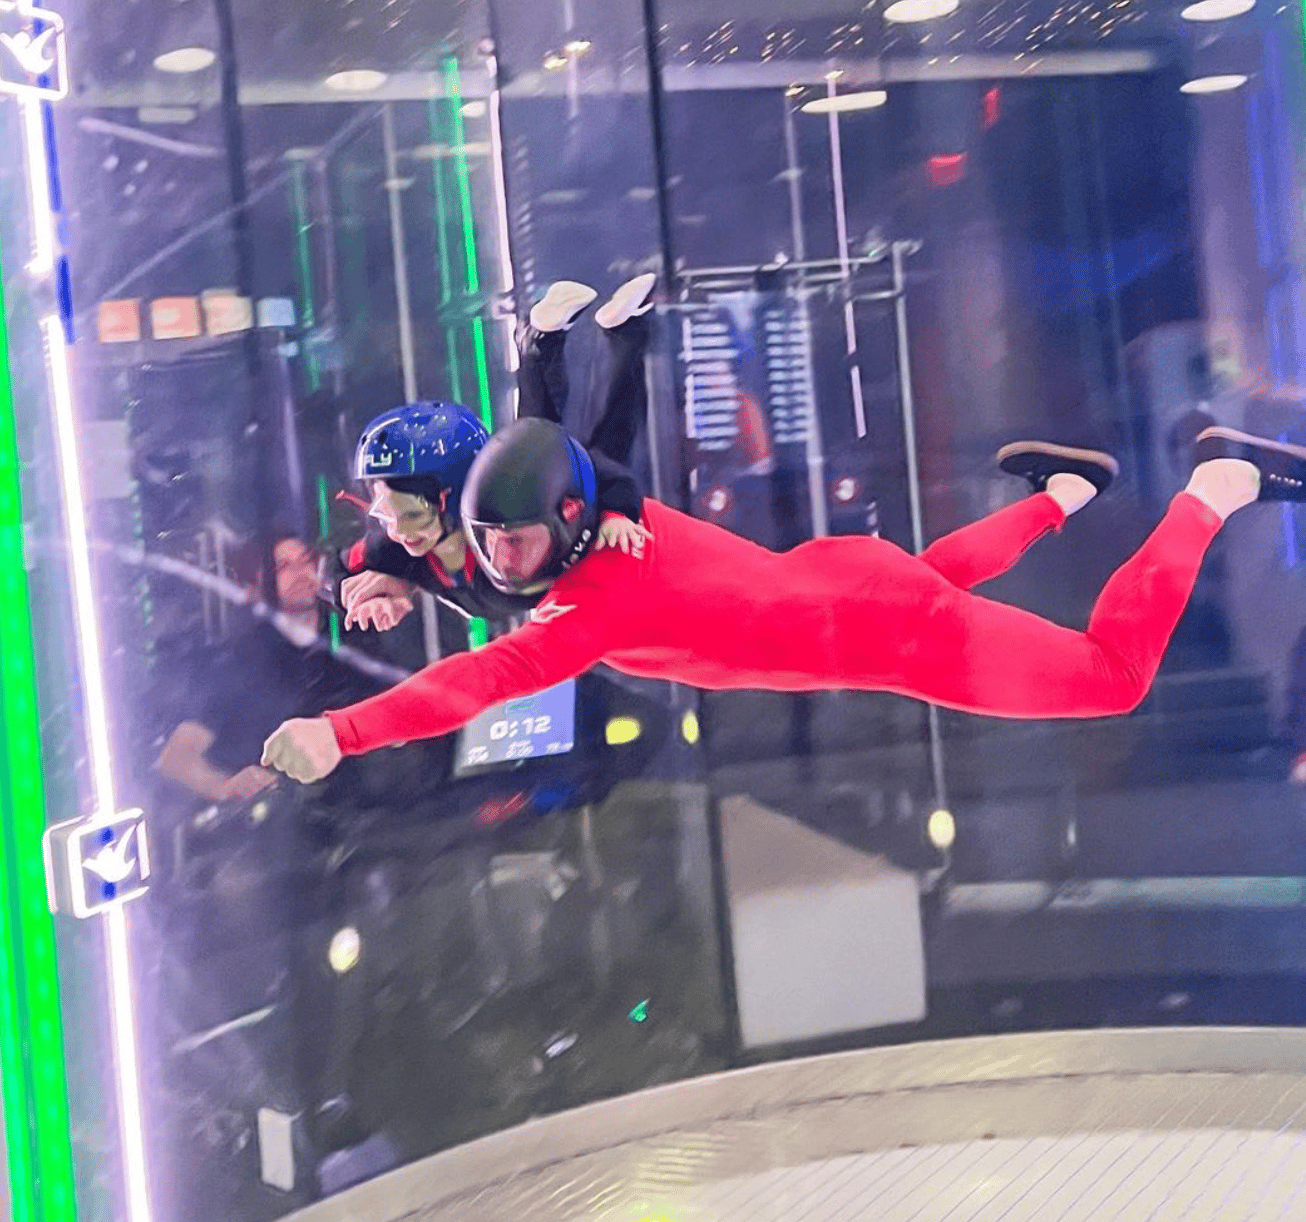 a skydiver instructor and kid with helmets in an indoor skydiving facility 